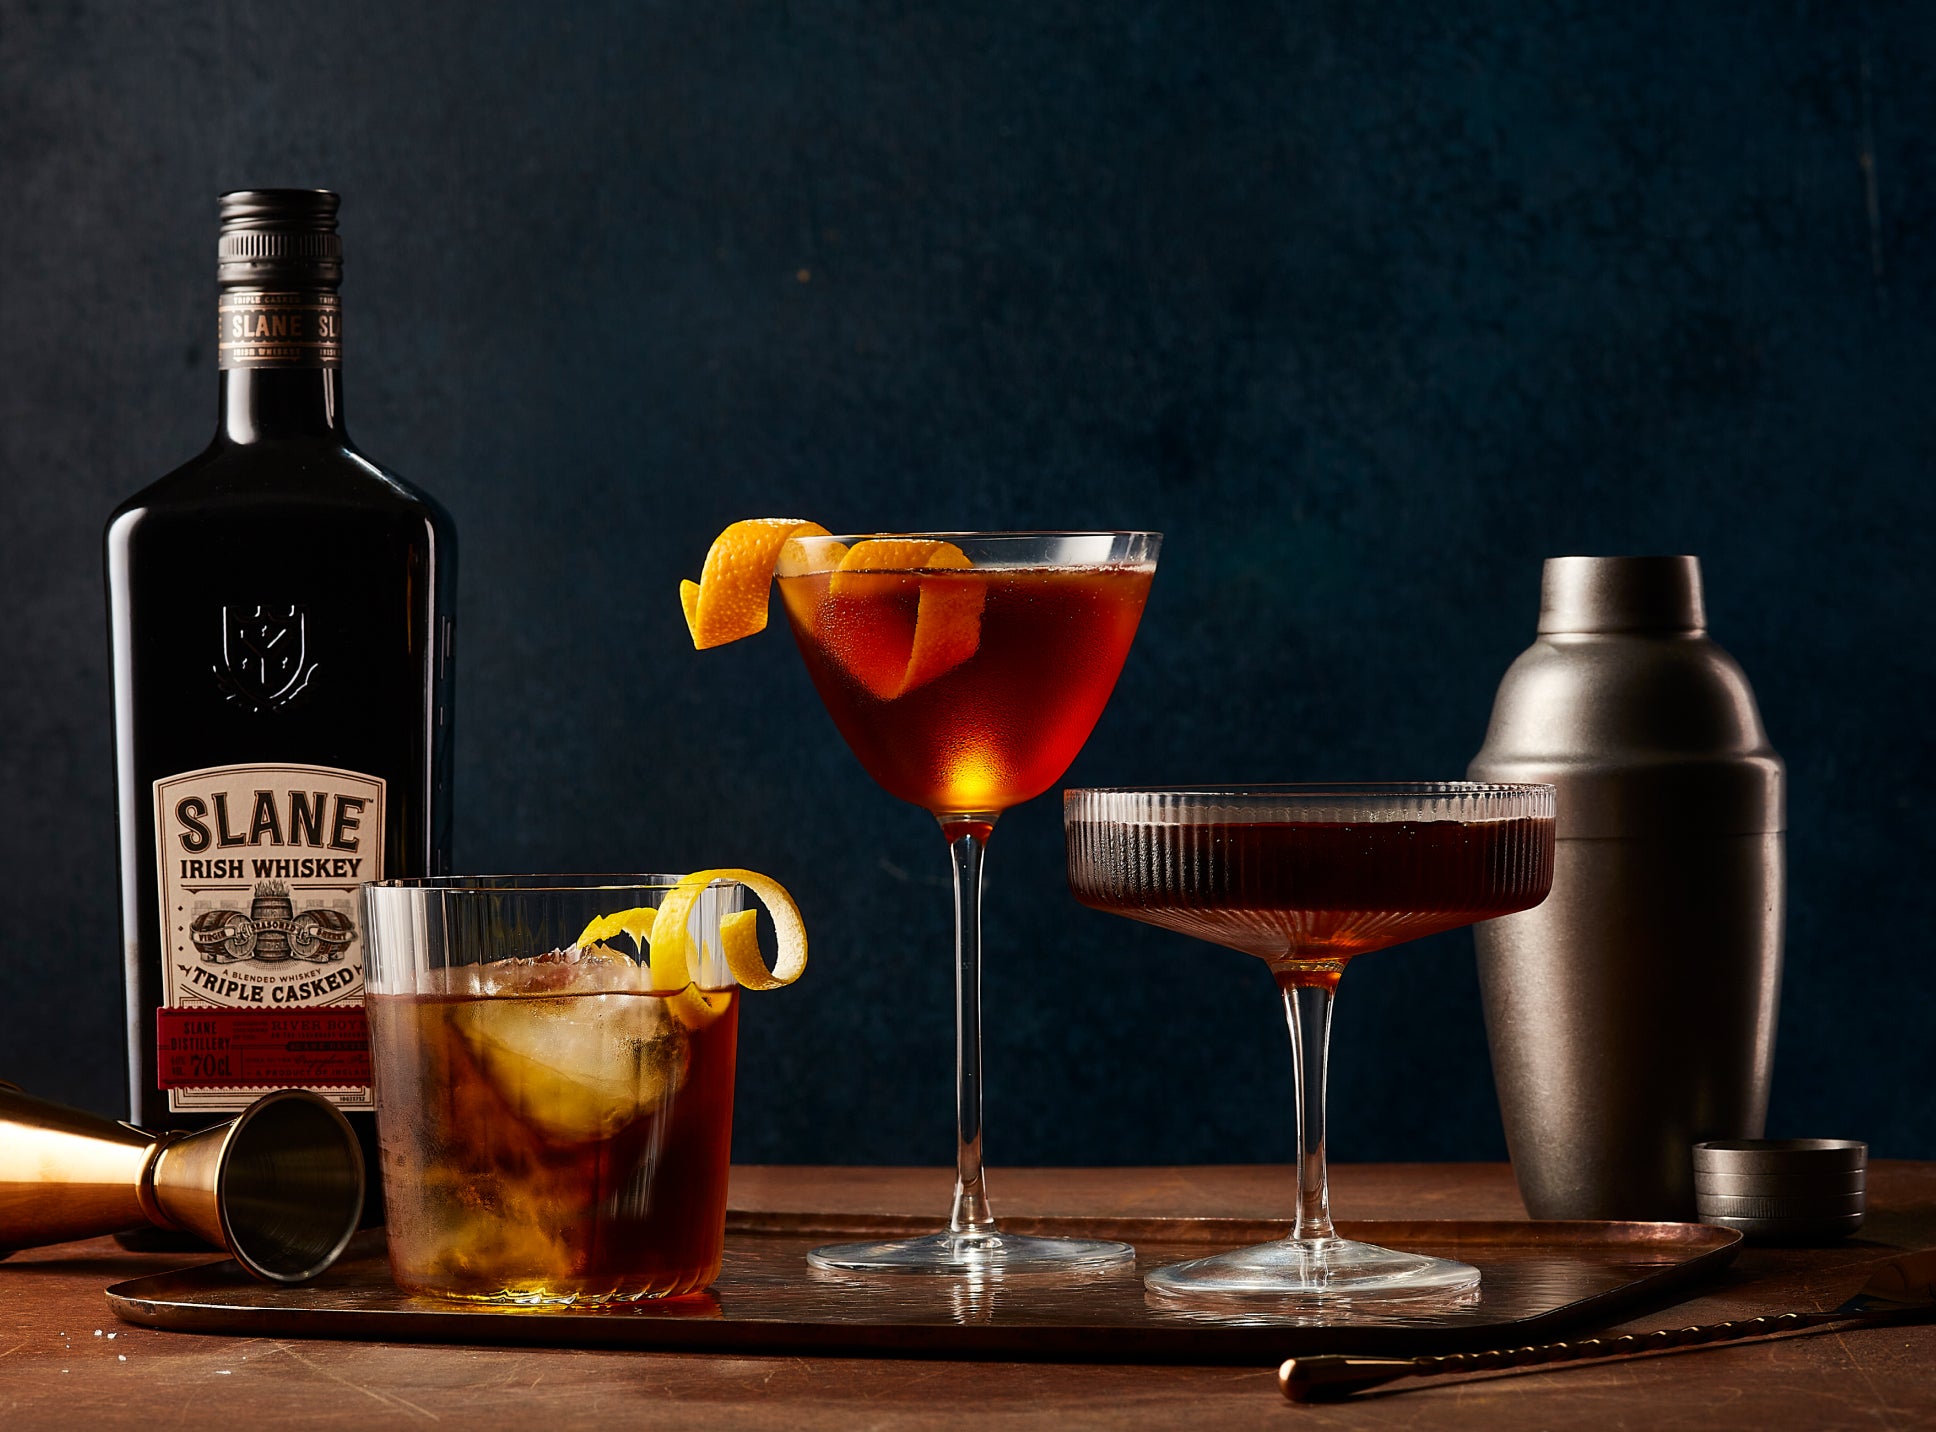 Discover three delicious Irish whiskey cocktails perfect for entertaining